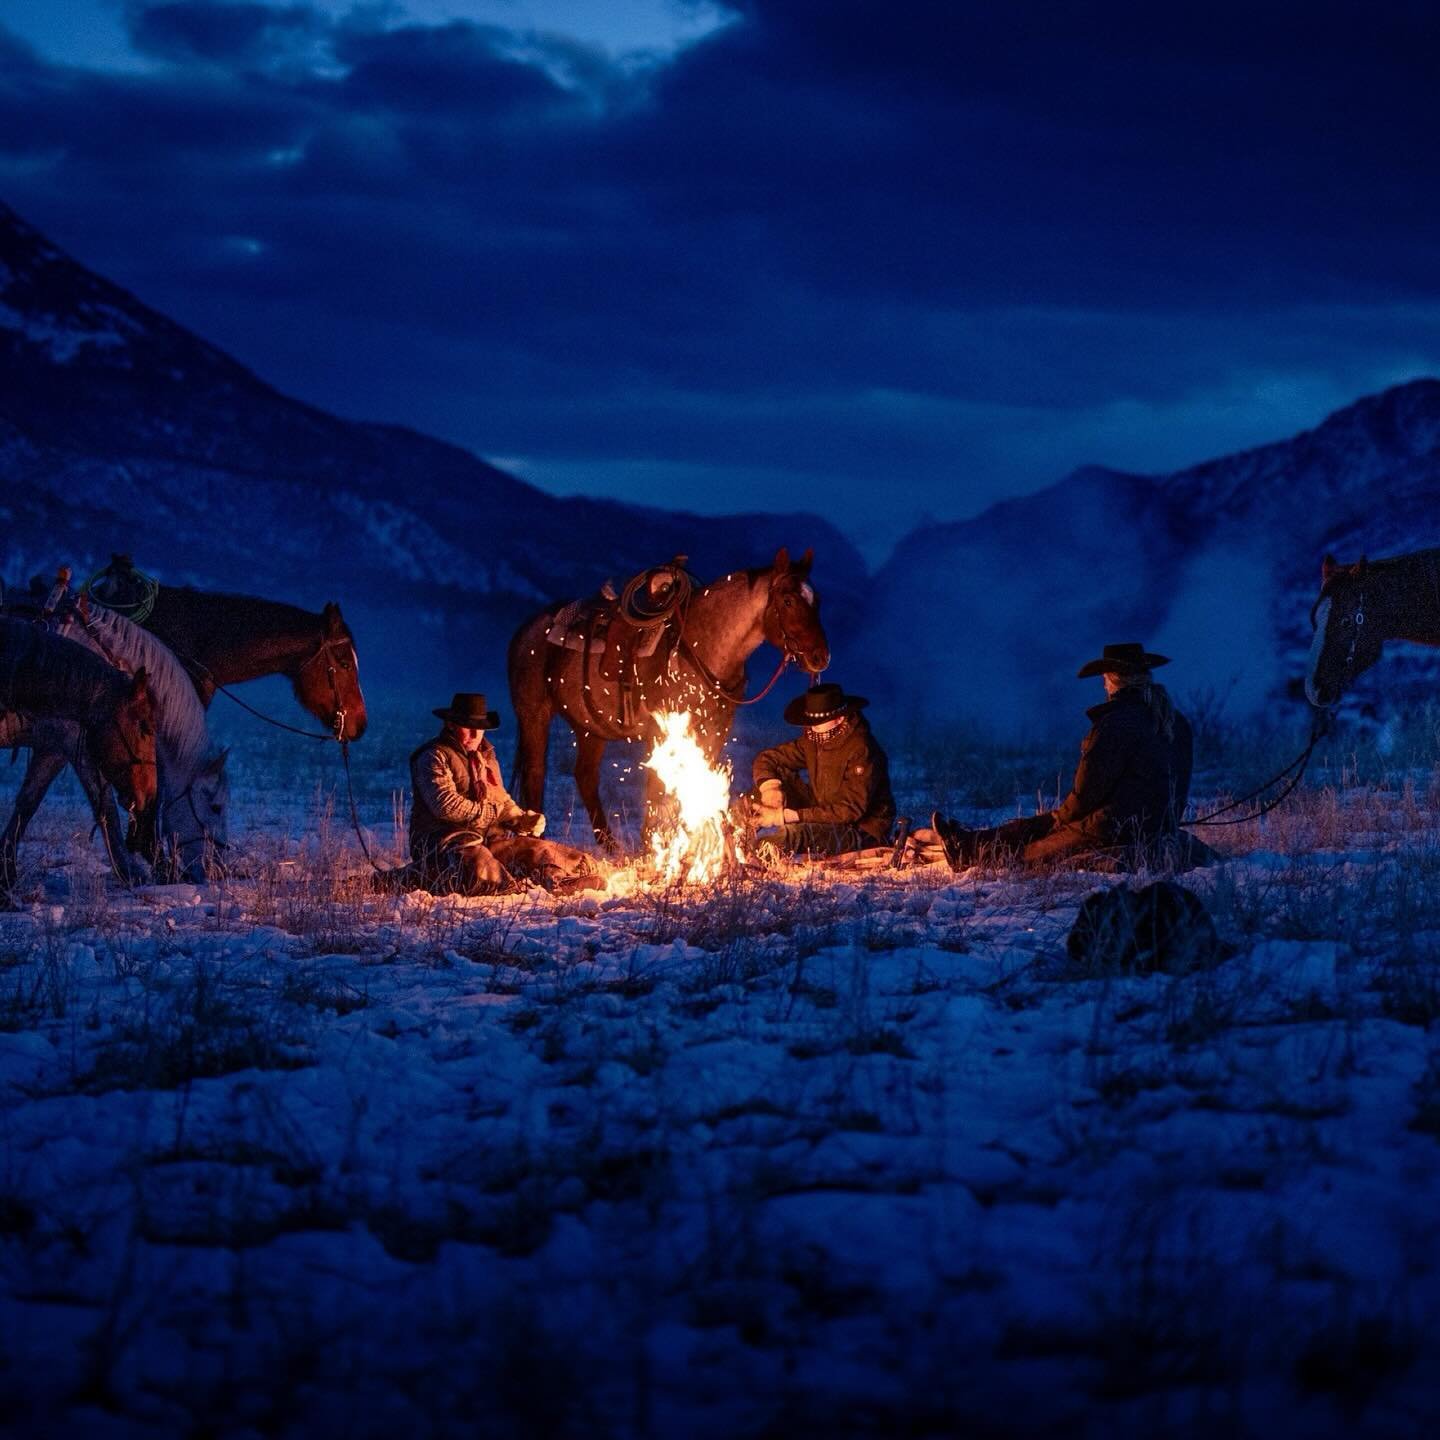 A cold winter night on the ranch with the Jacobers. Had a blast shooting this one. 

Directed by @alexstrohl for @sienavalleyclub 
Produced by @nataleretzlaff 
Photo assist from @juliaordog